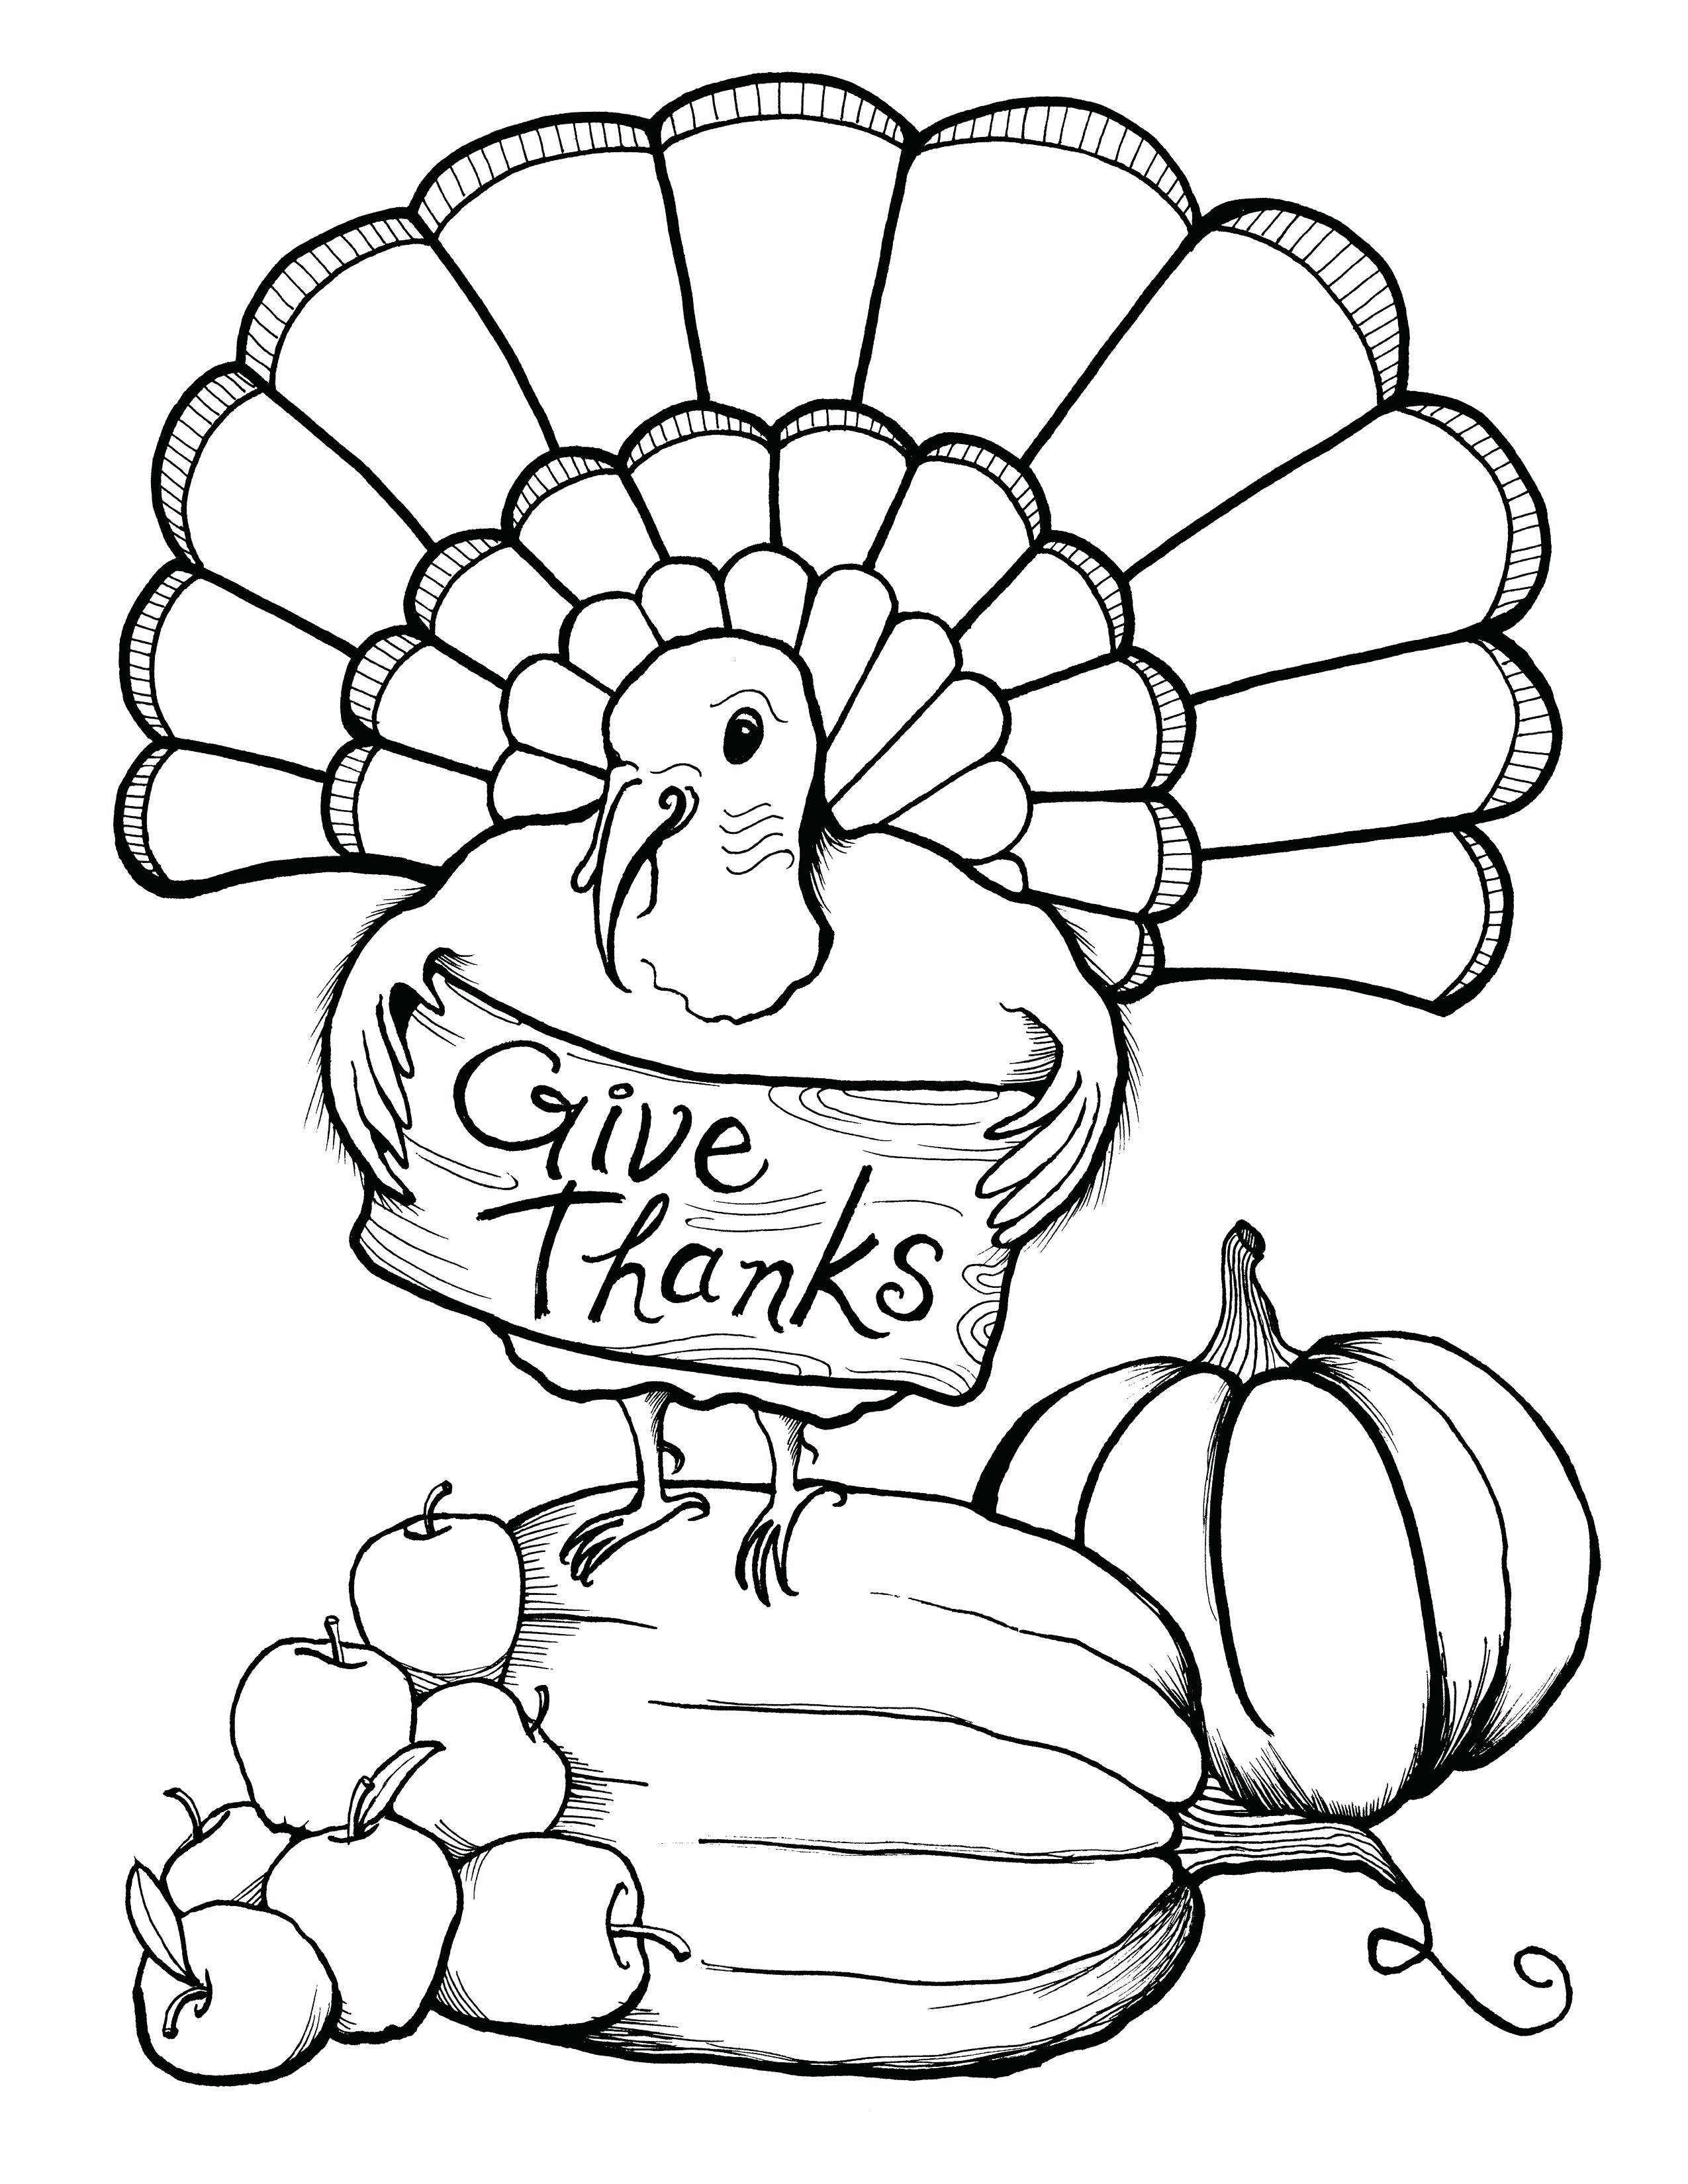 926 Unicorn Free Printable Thanksgiving Turkey Coloring Pages for Adult